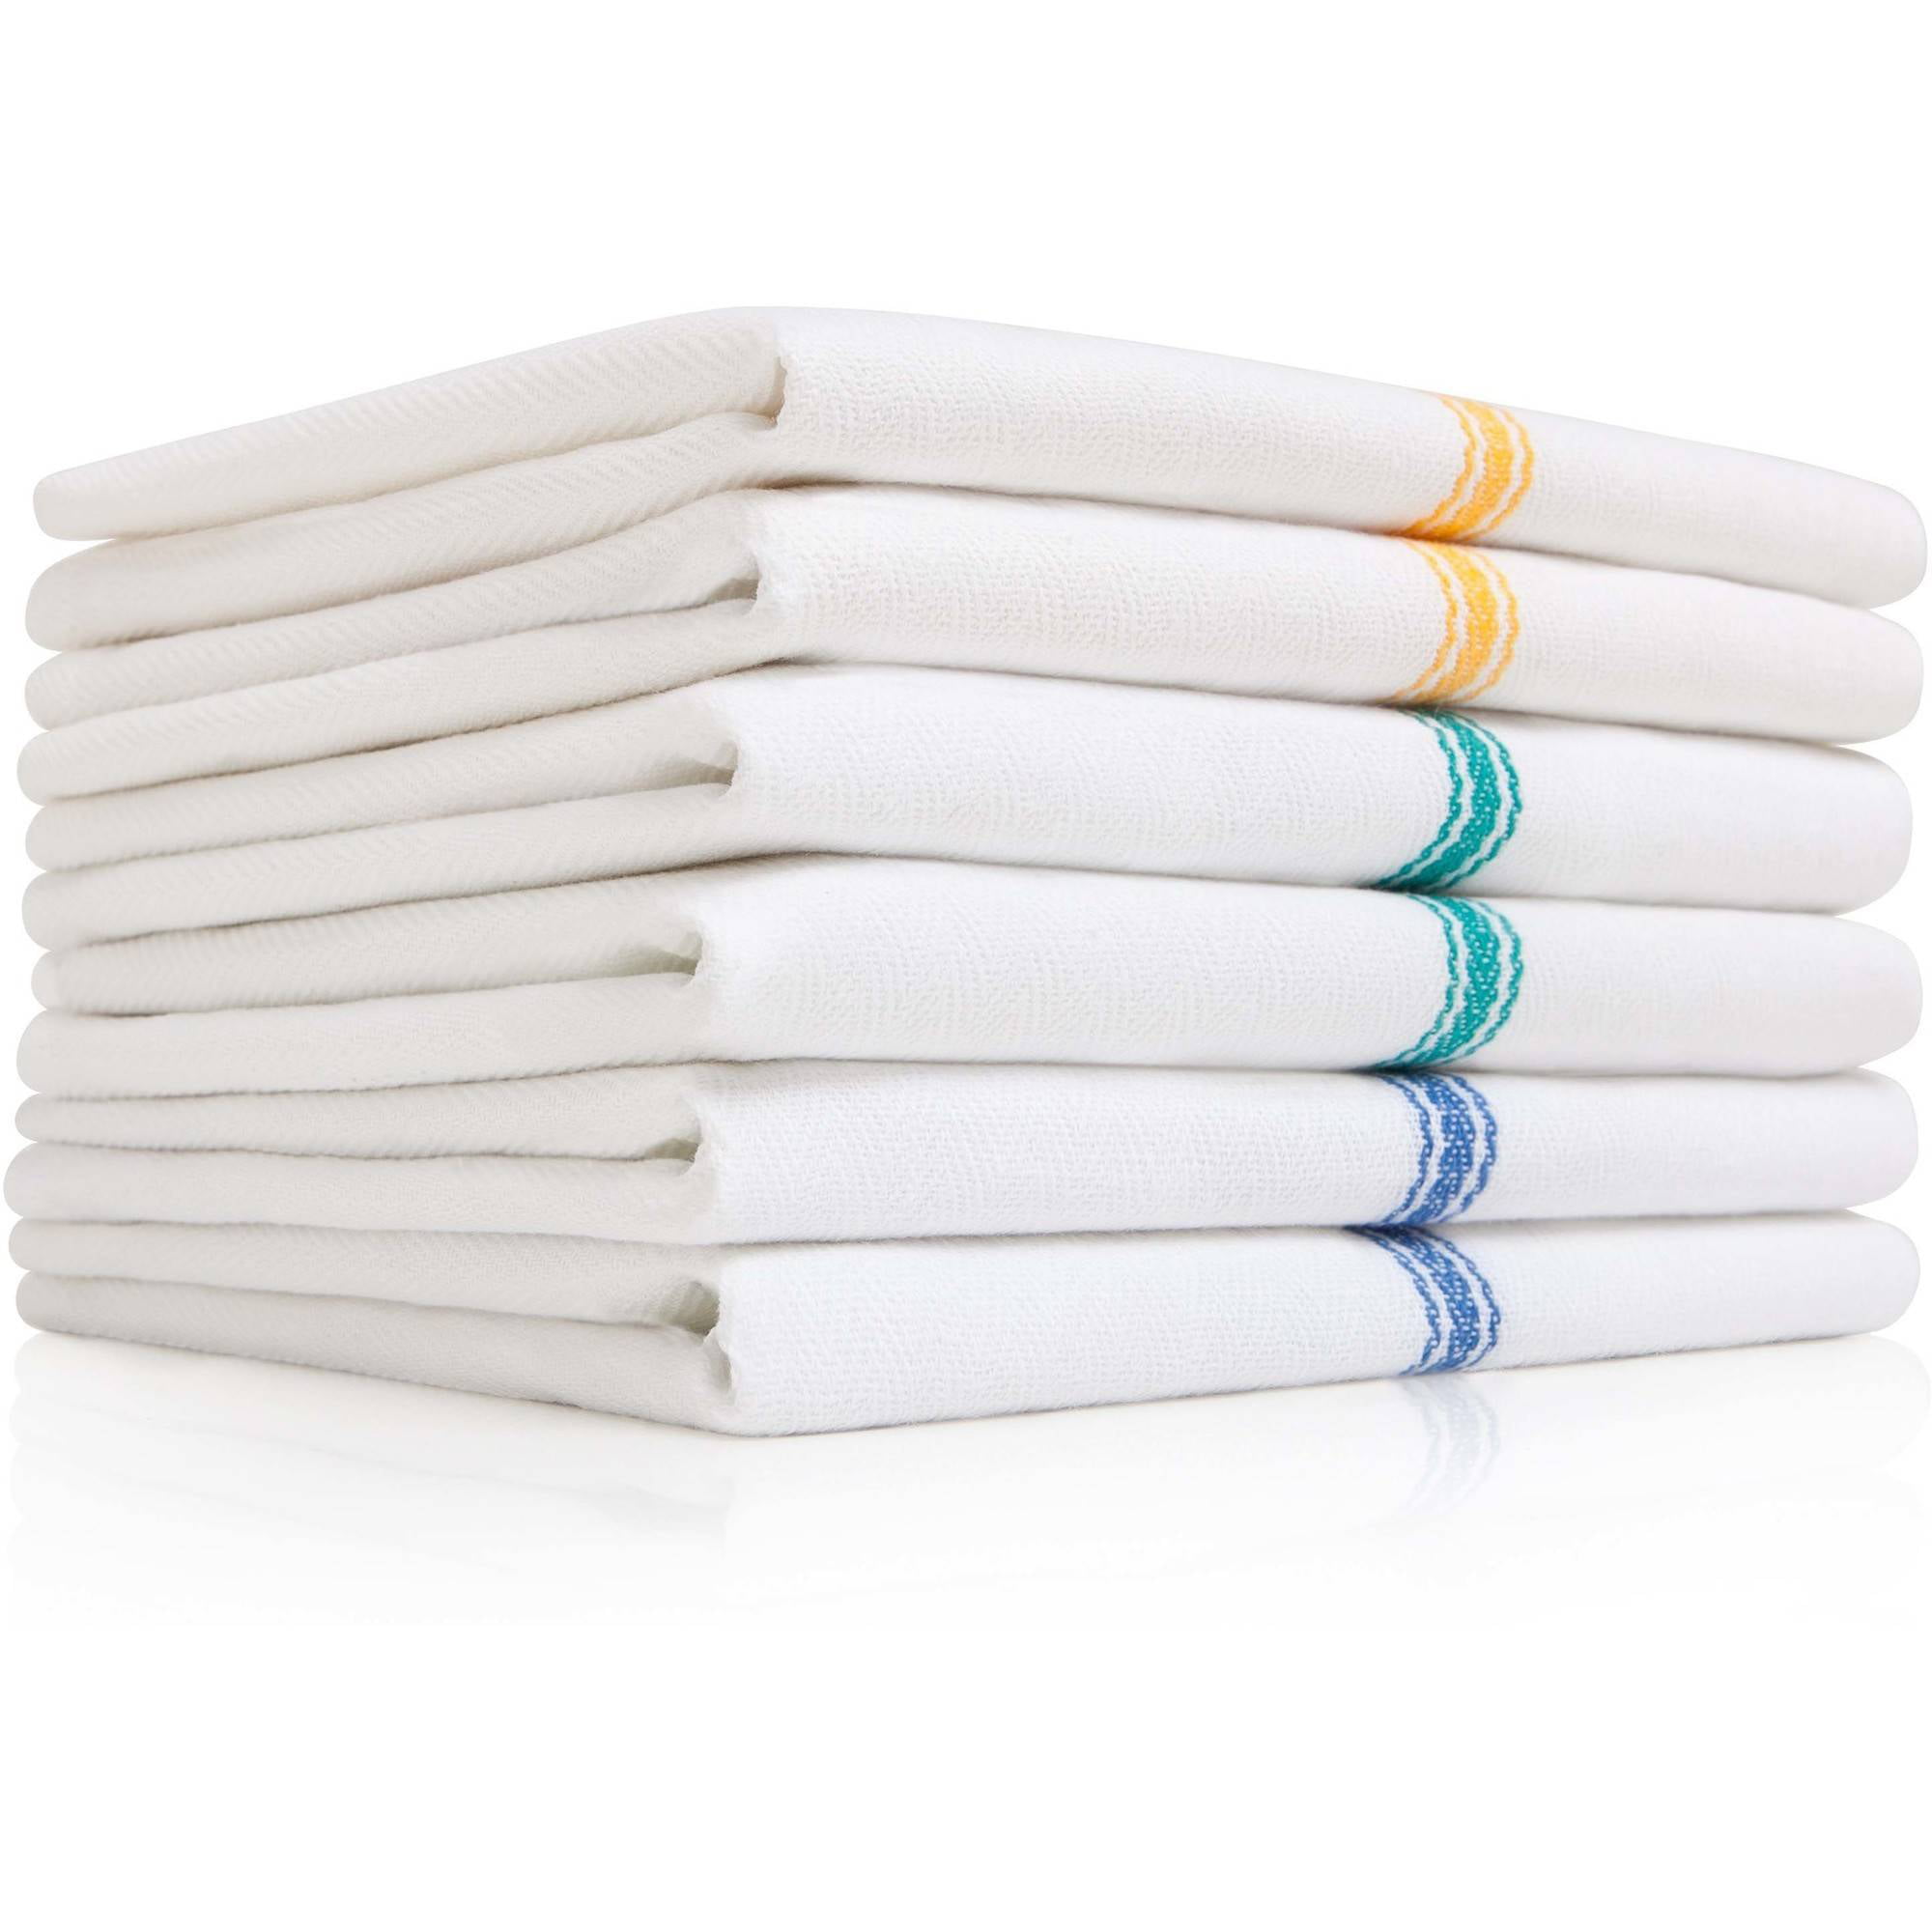 Premia Commercial Kitchen Towels, 12 Pack, White Dish Towels with Center  Stripe, Aqua 